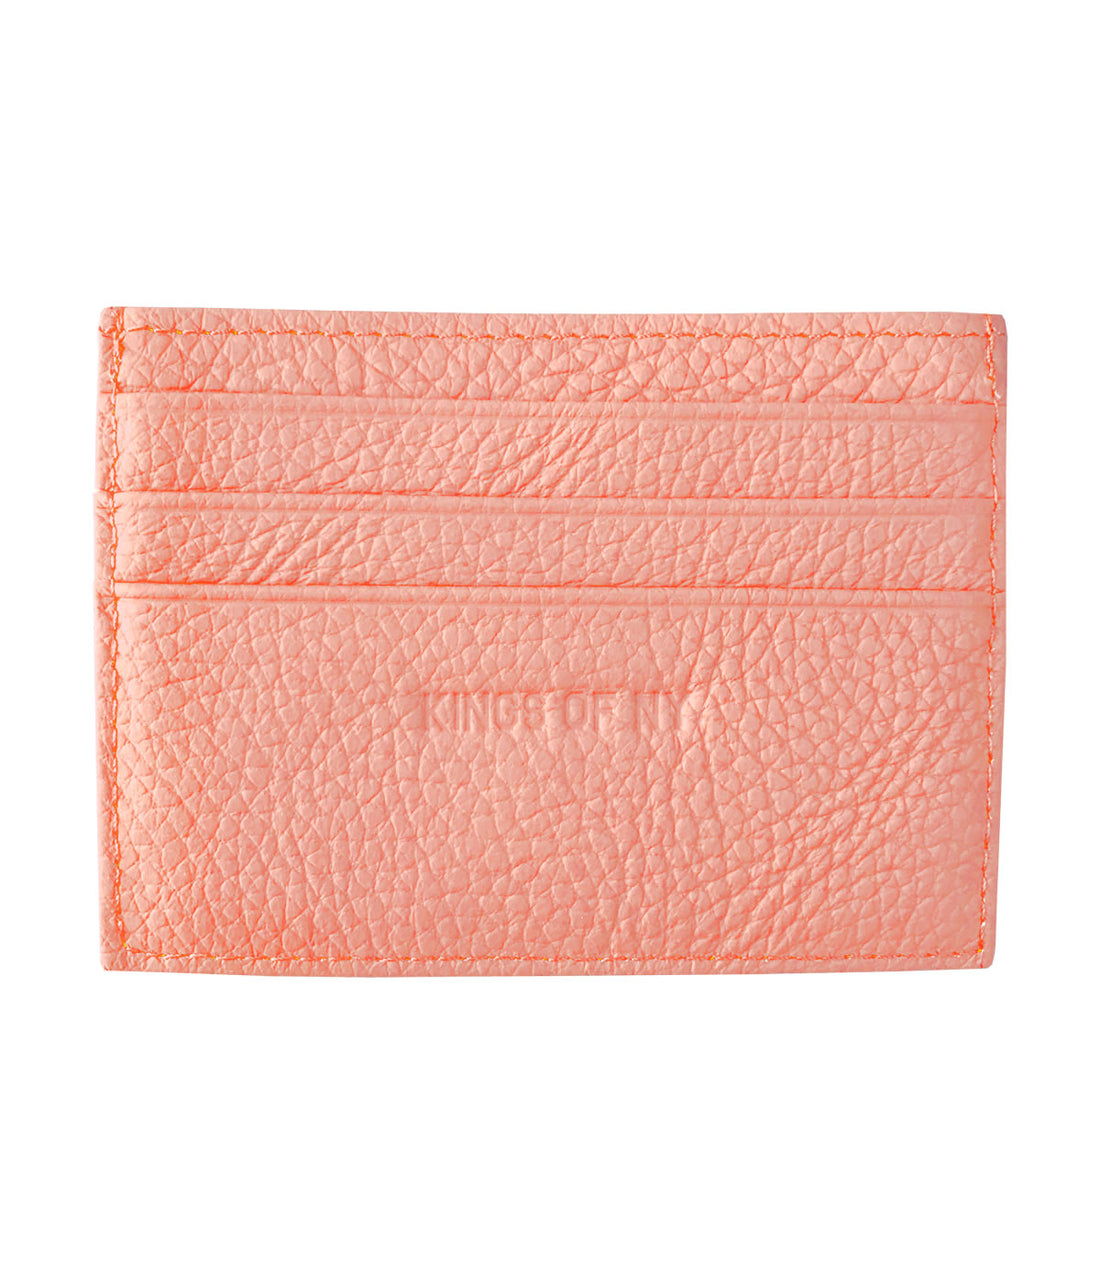 Kings Of NY Pebble Leather Card Holder Wallet Salmon